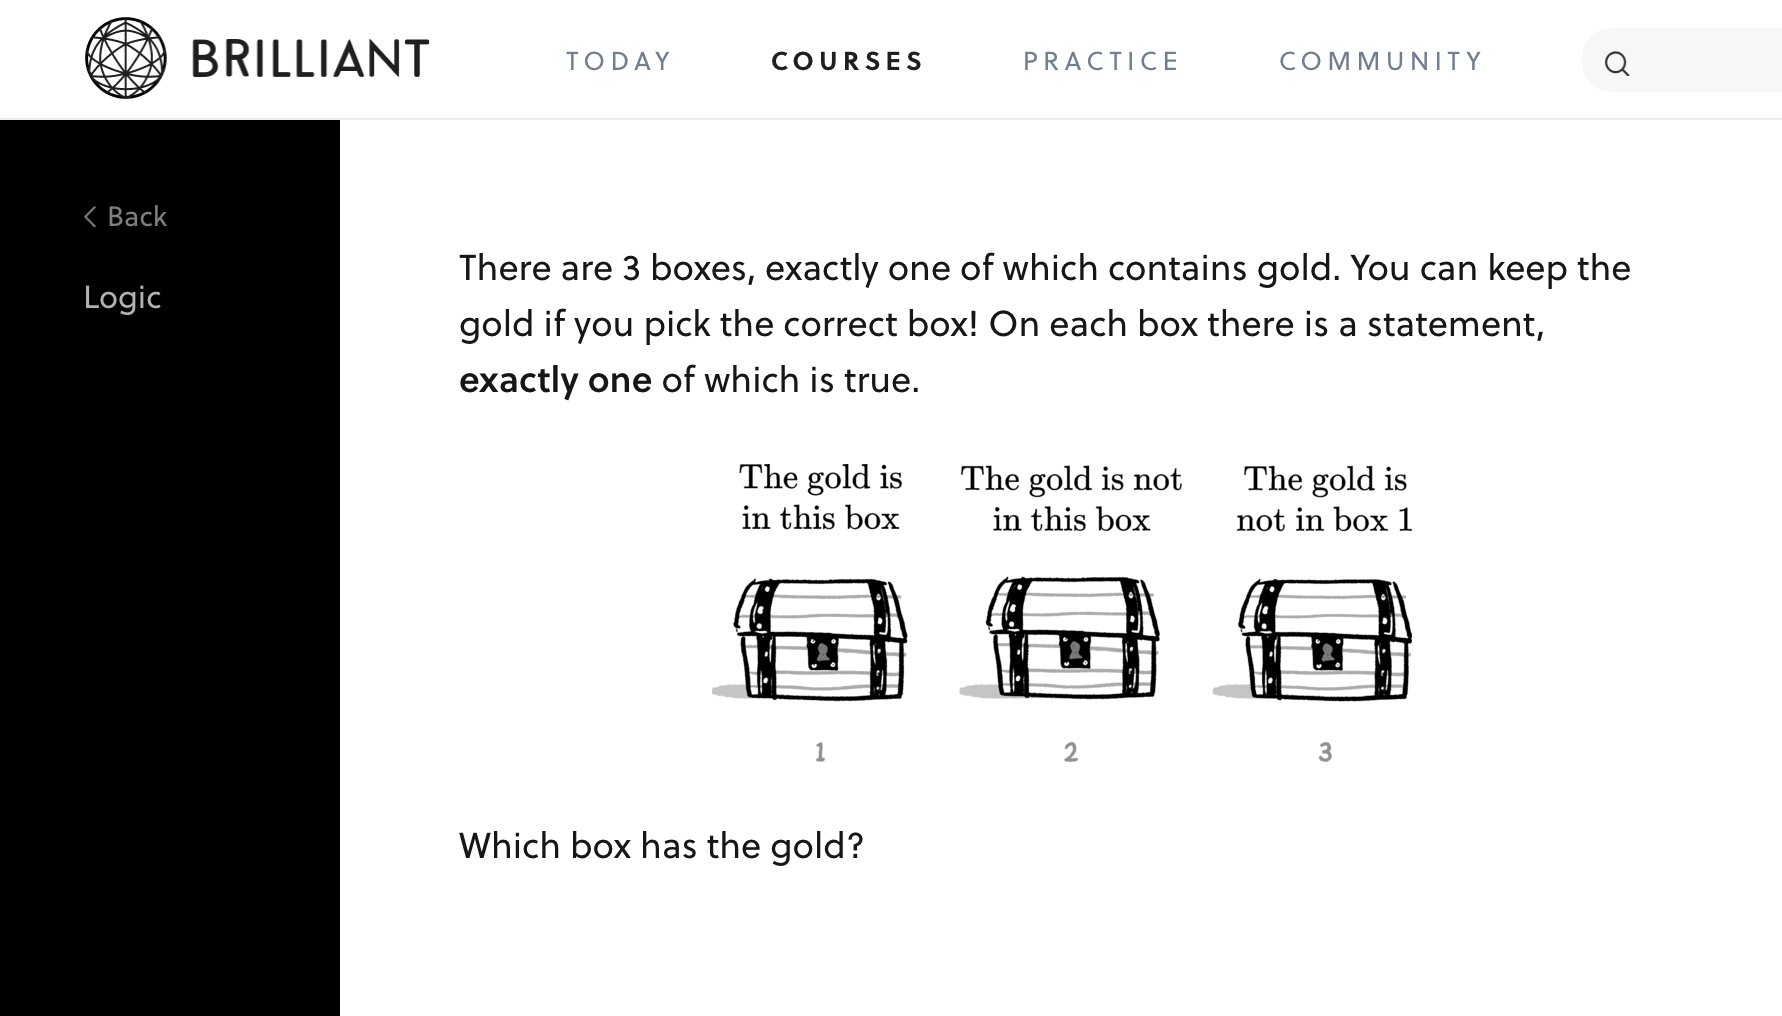 Which box has the gold?